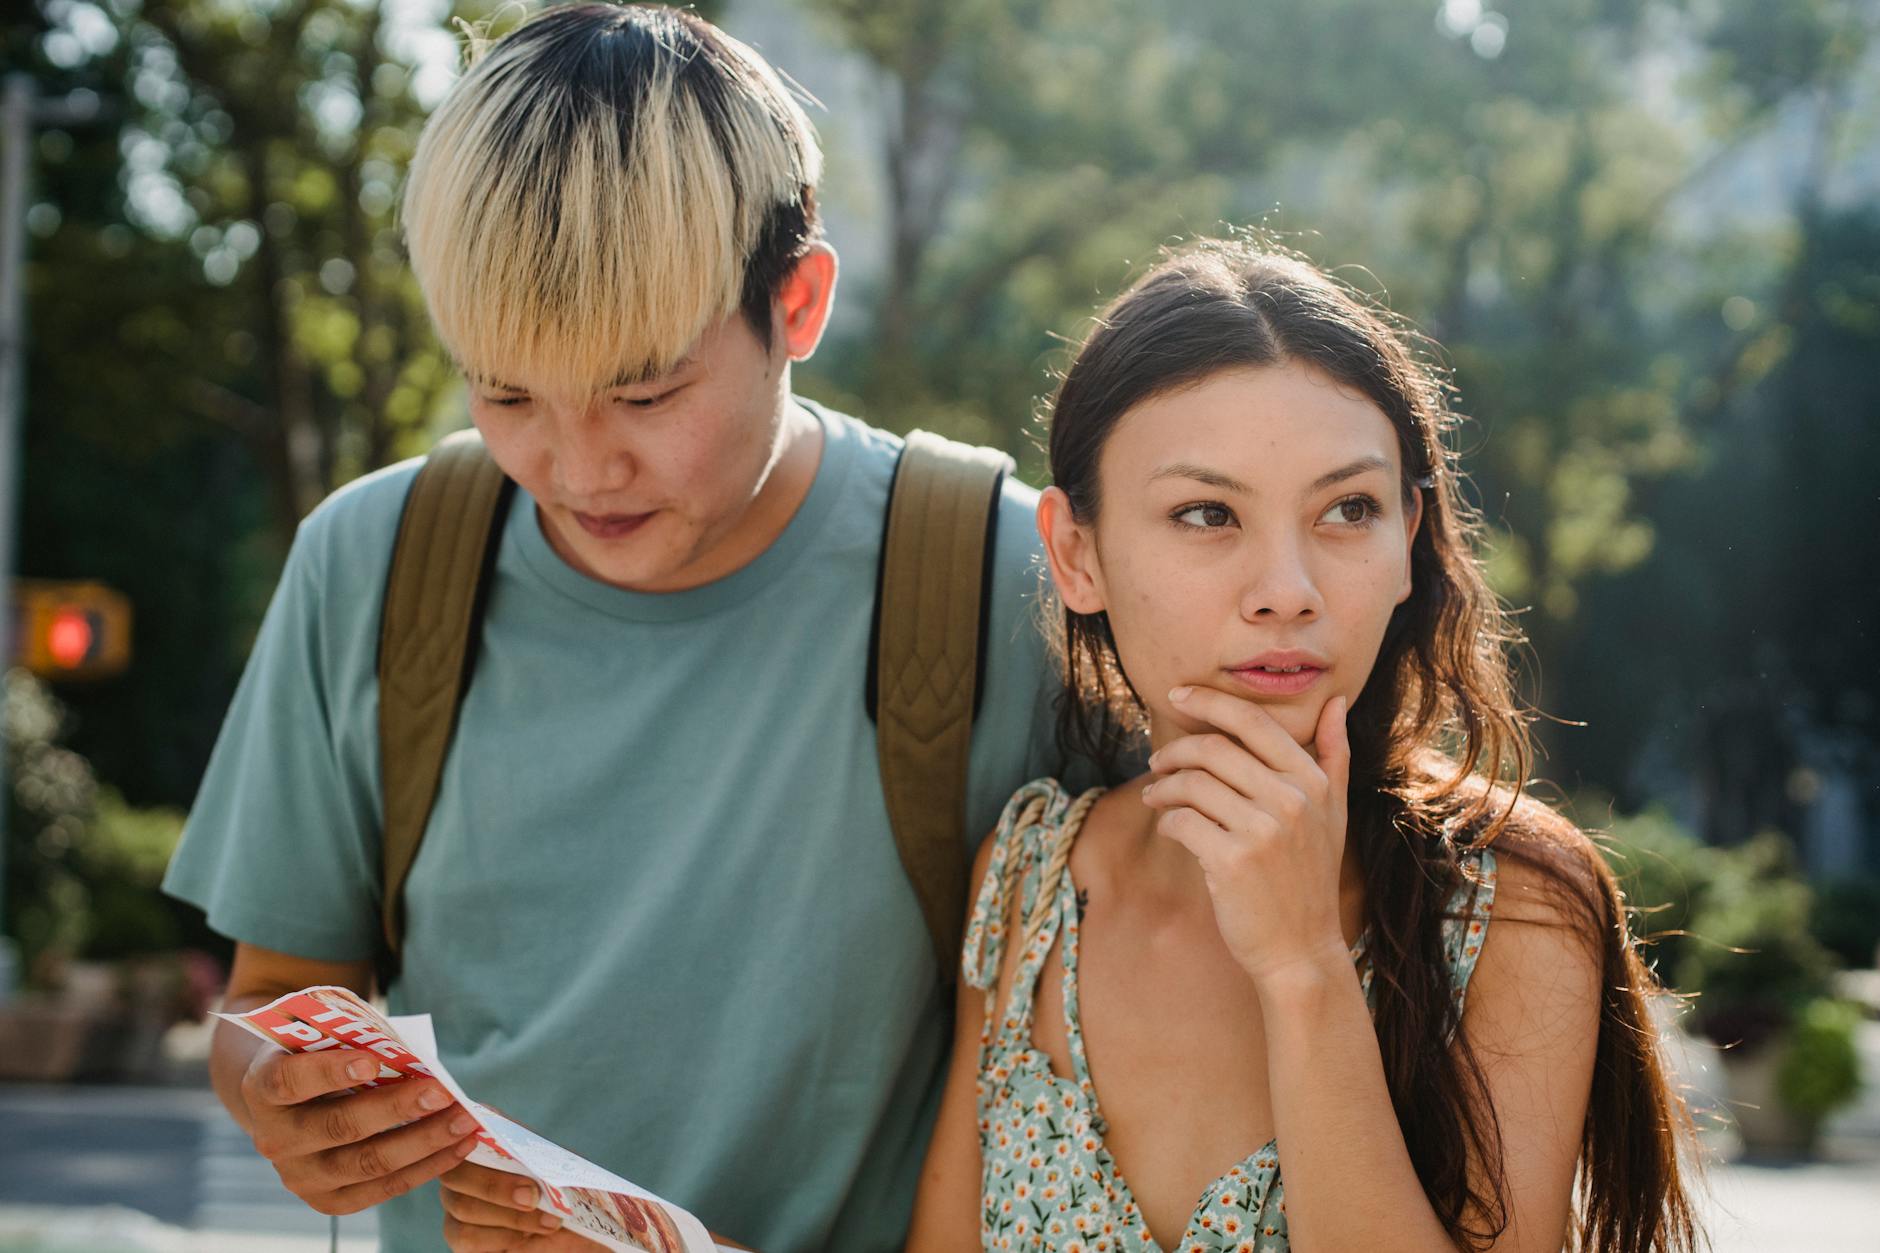 Confused multiracial couple searching way in map while discovering city together during summer holidays